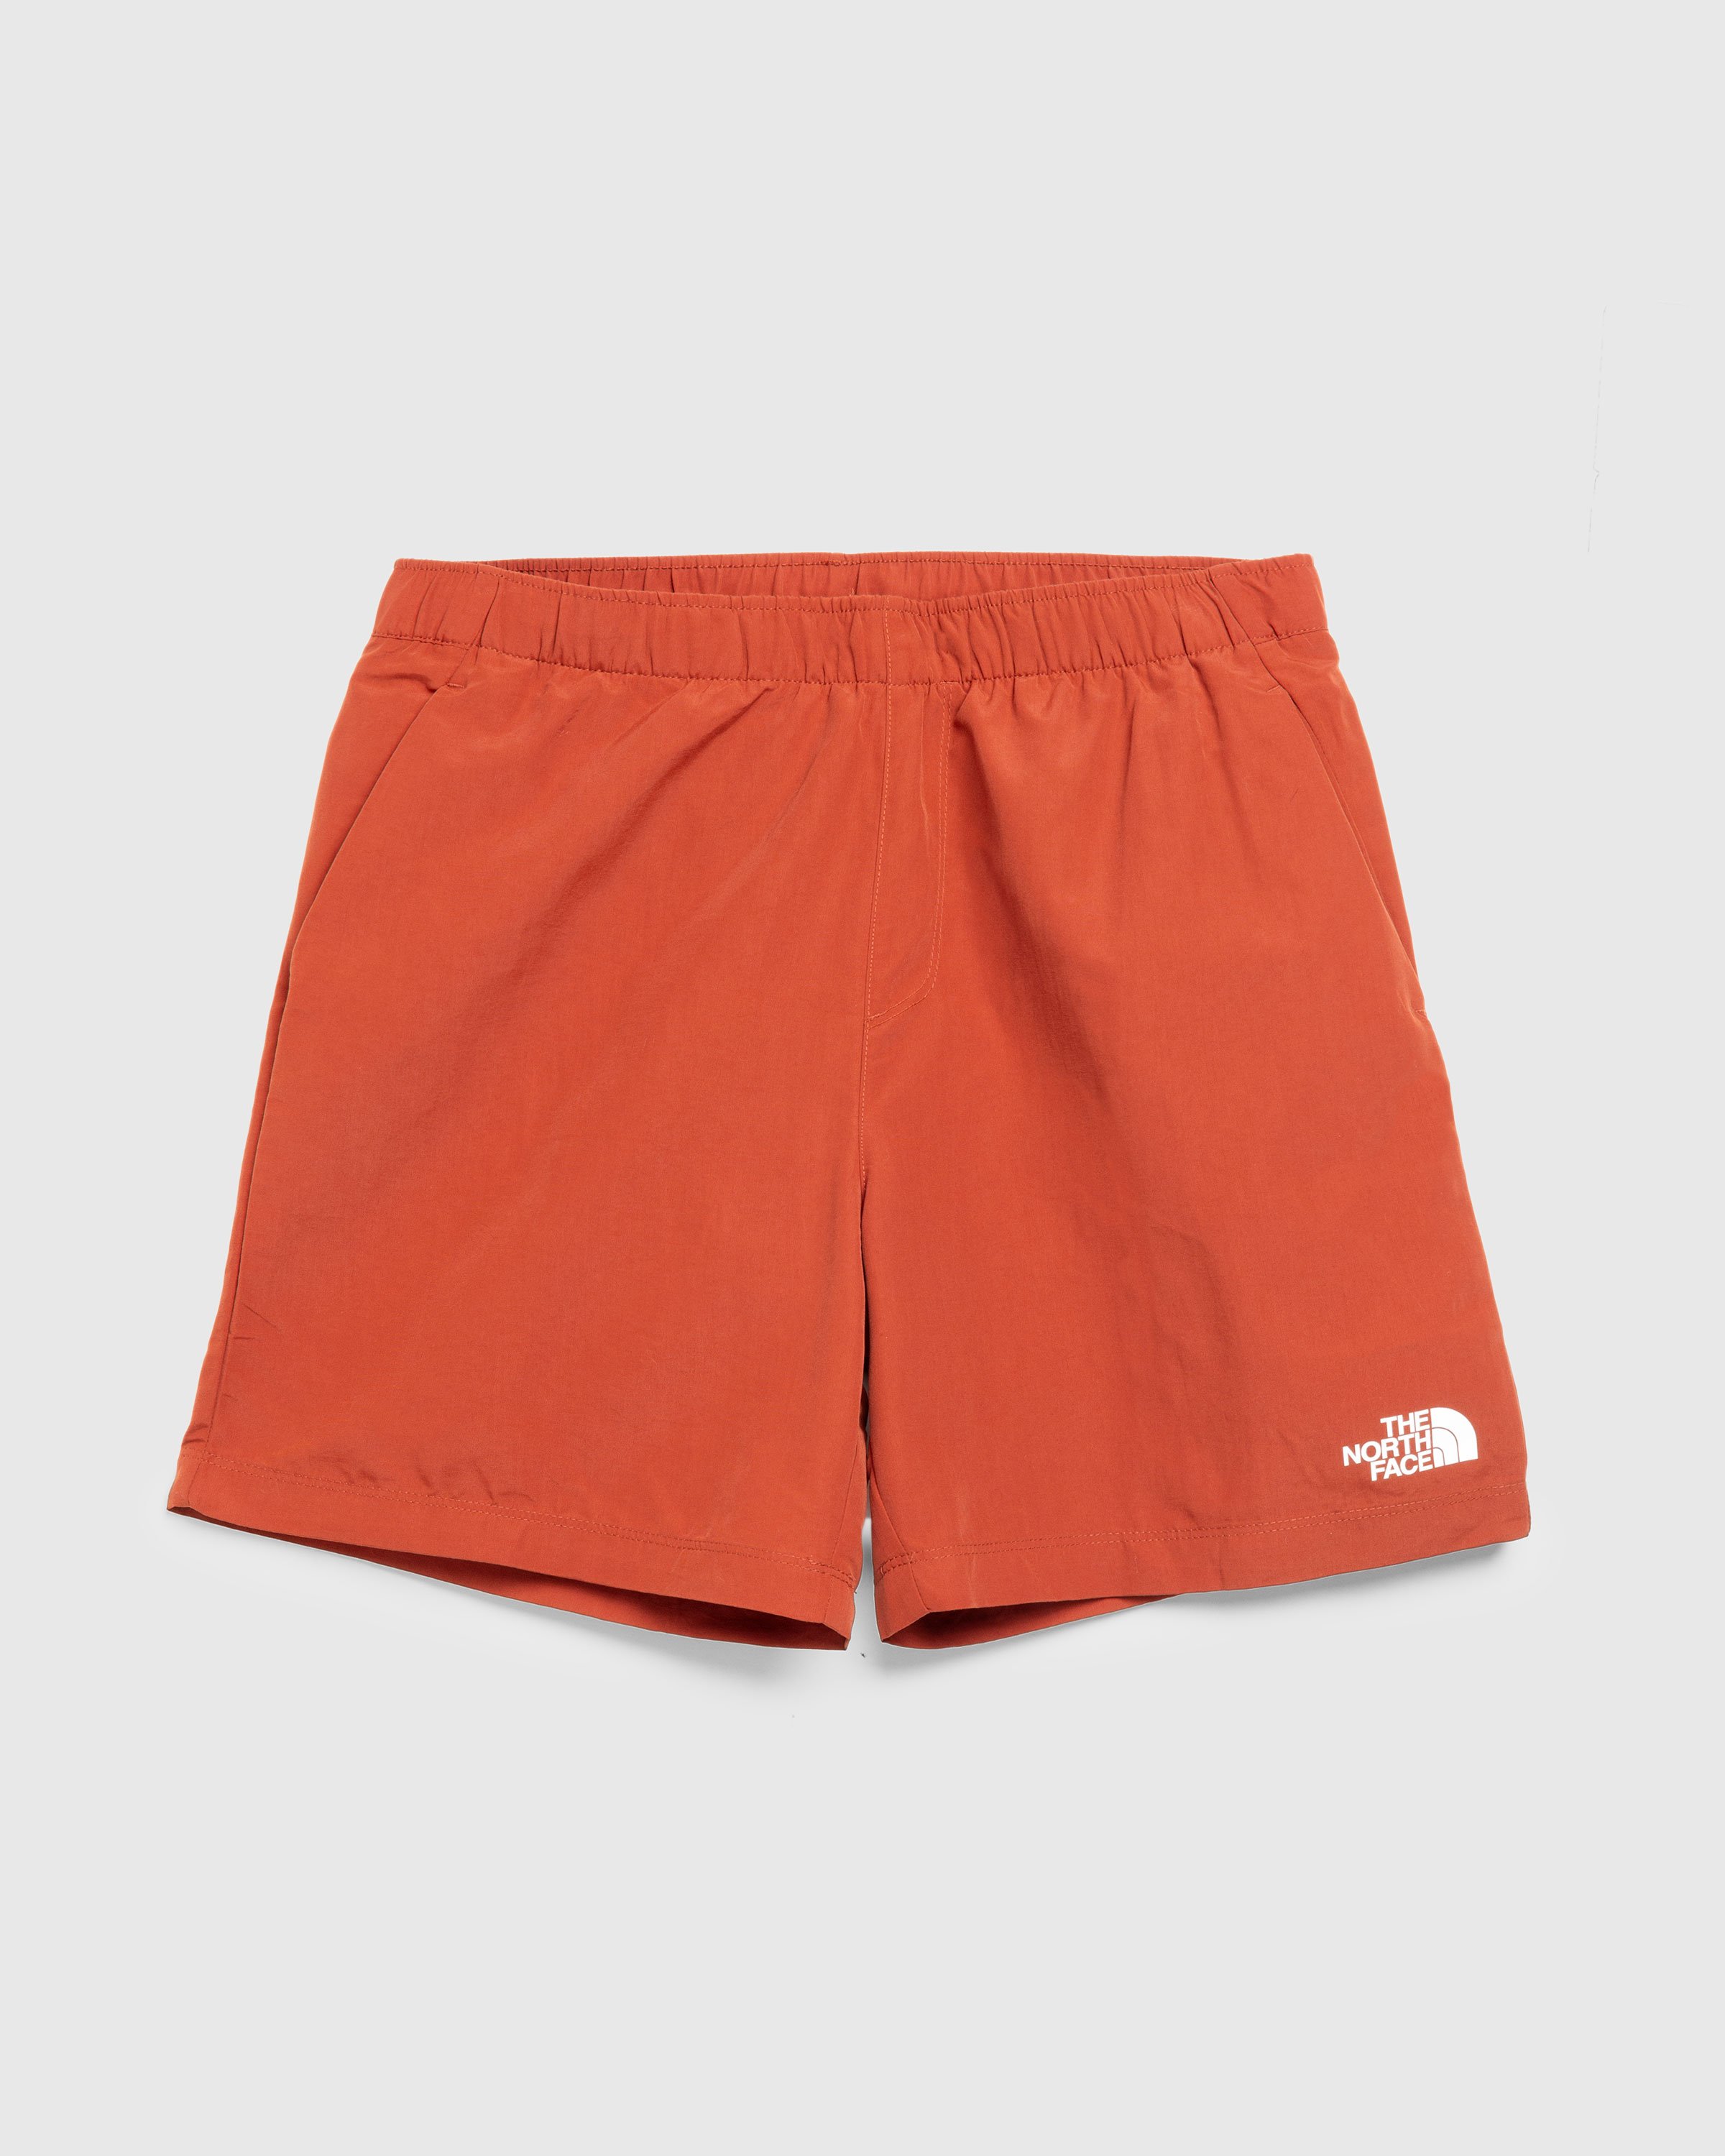 The North Face - M WATER SHORT - EU IRON RED - Clothing - Red - Image 1